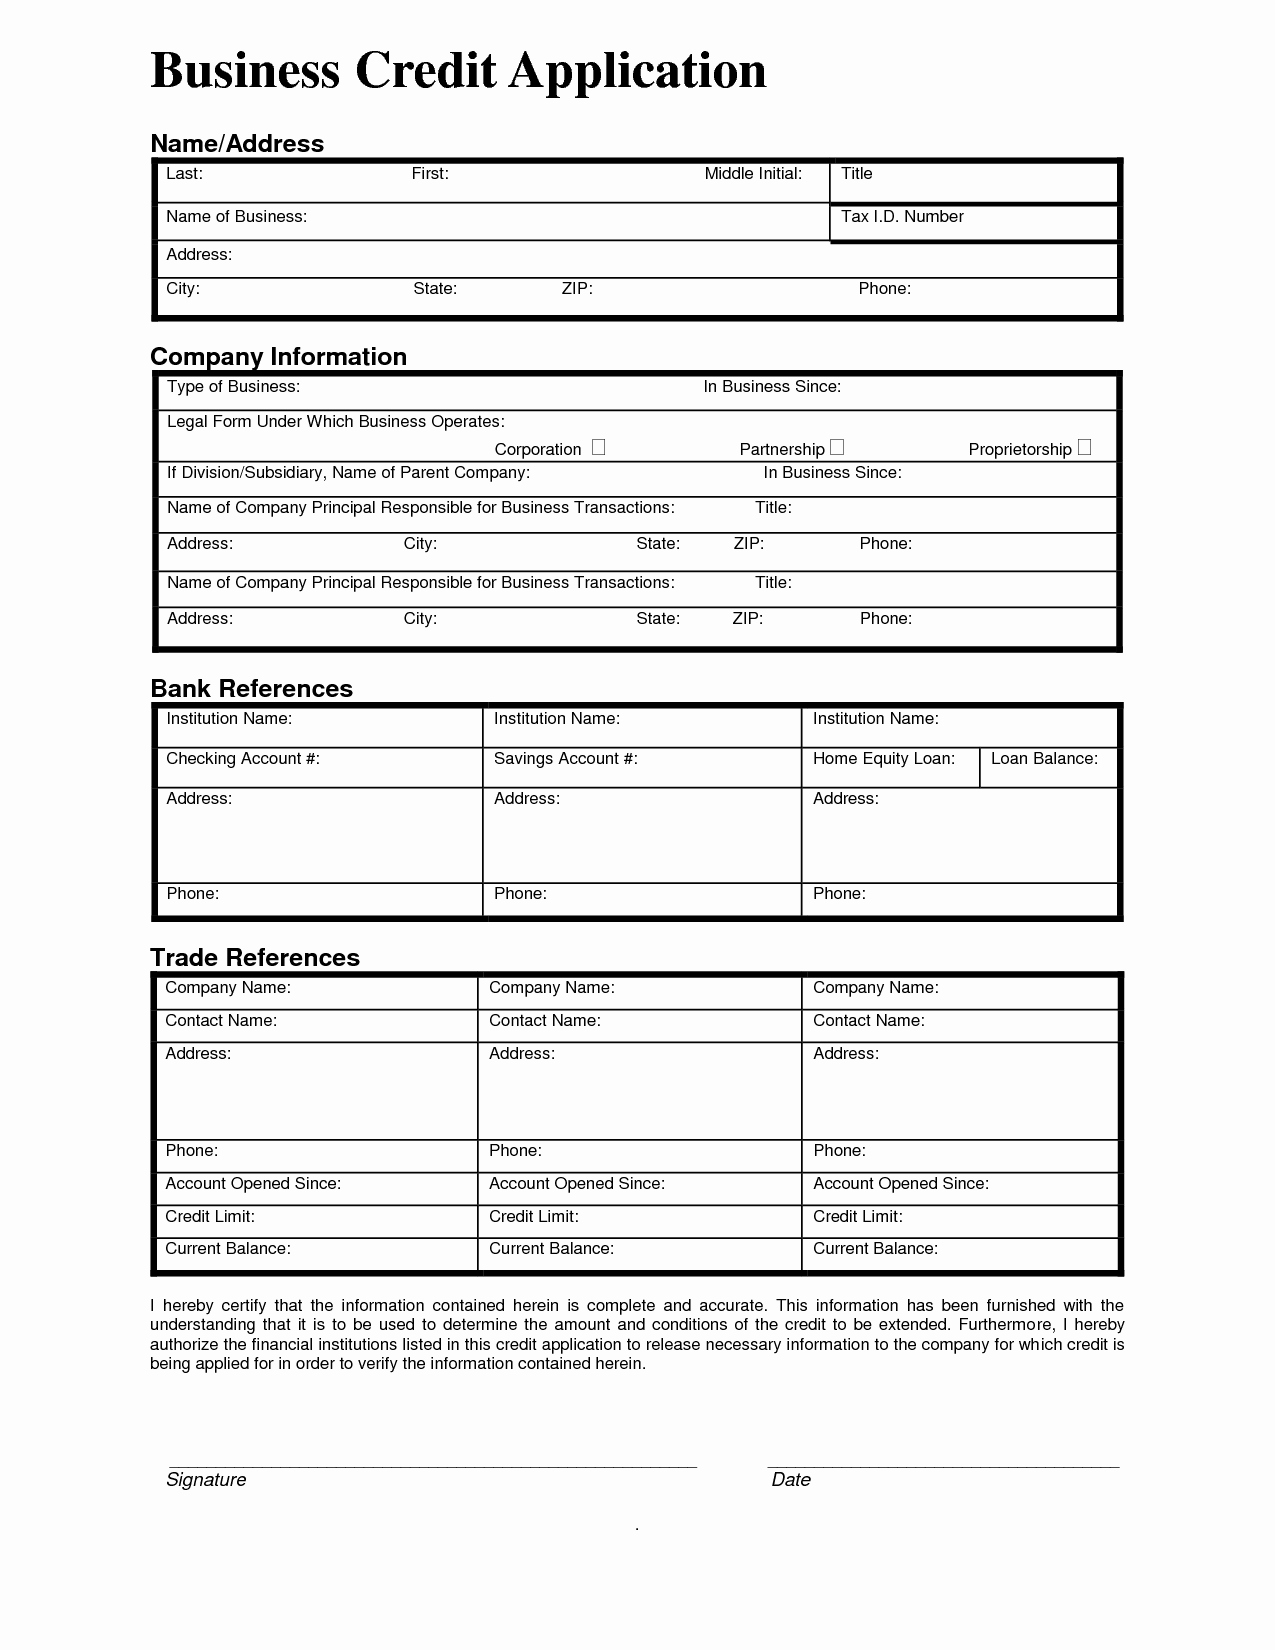 Business Credit Application Template Best Of Business forms Templates Free Mughals